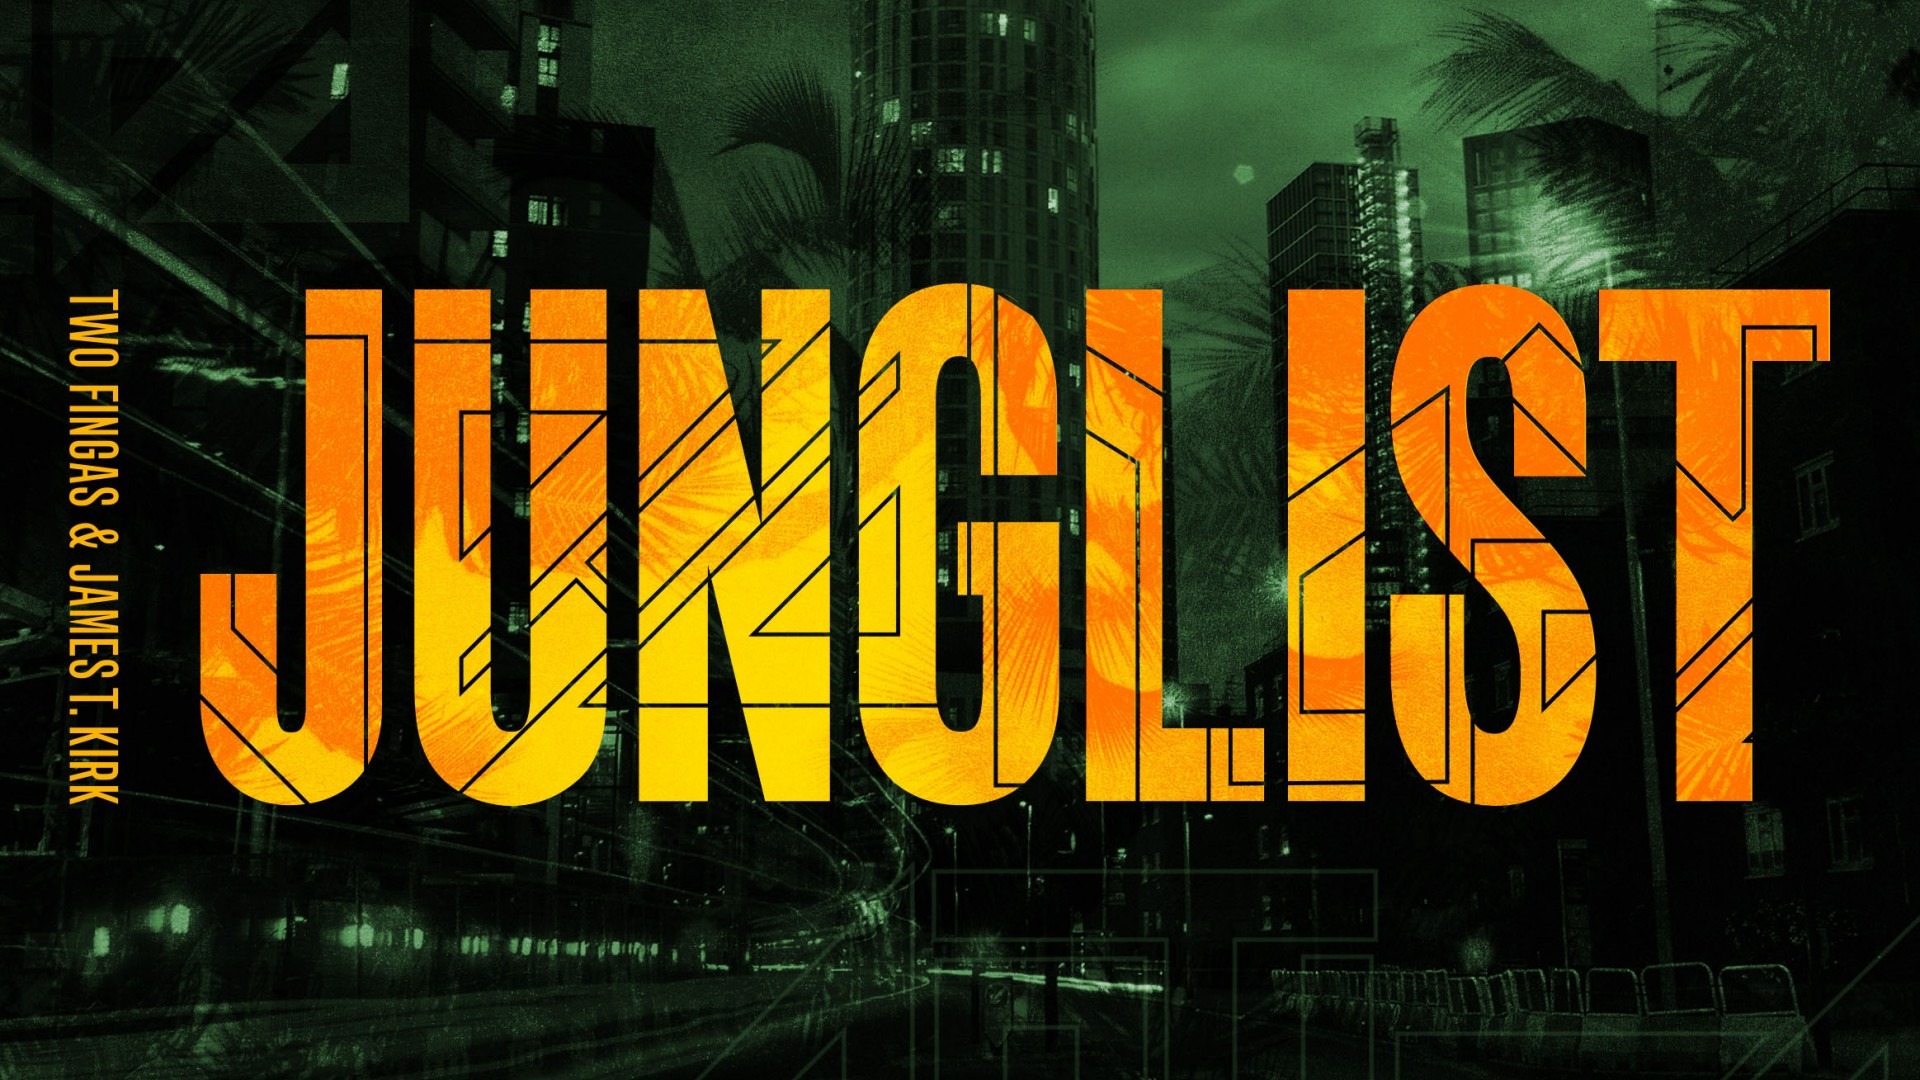 JUNGLIST, the first novel based on London's early '90s jungle scene, is going back into print